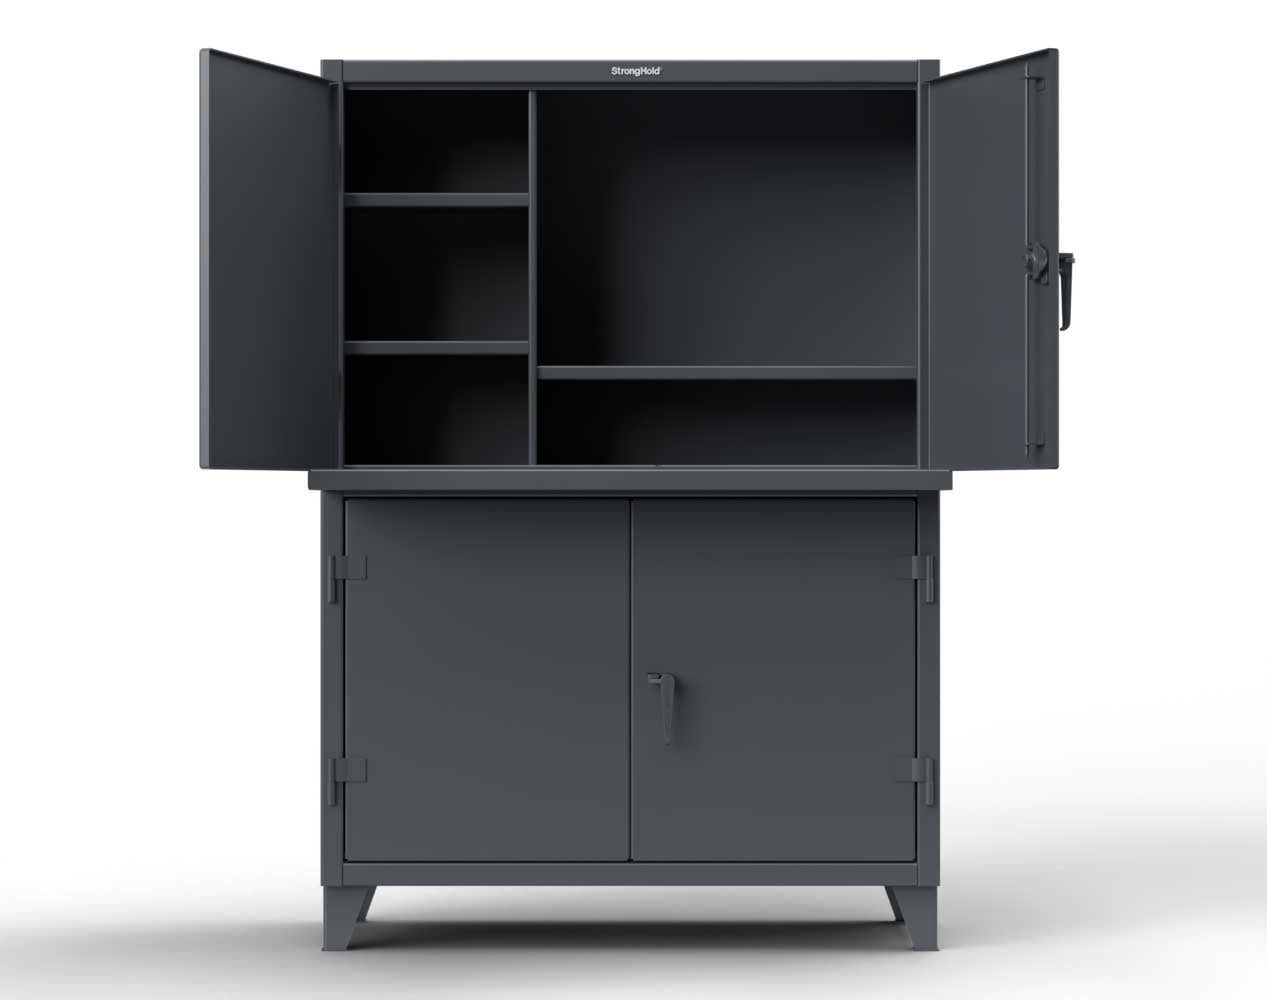 Extreme Duty 12 GA Multi-Compartment Computer Cabinet with 4 Shelves - 60 In. W x 24 In. D x 78 In. H